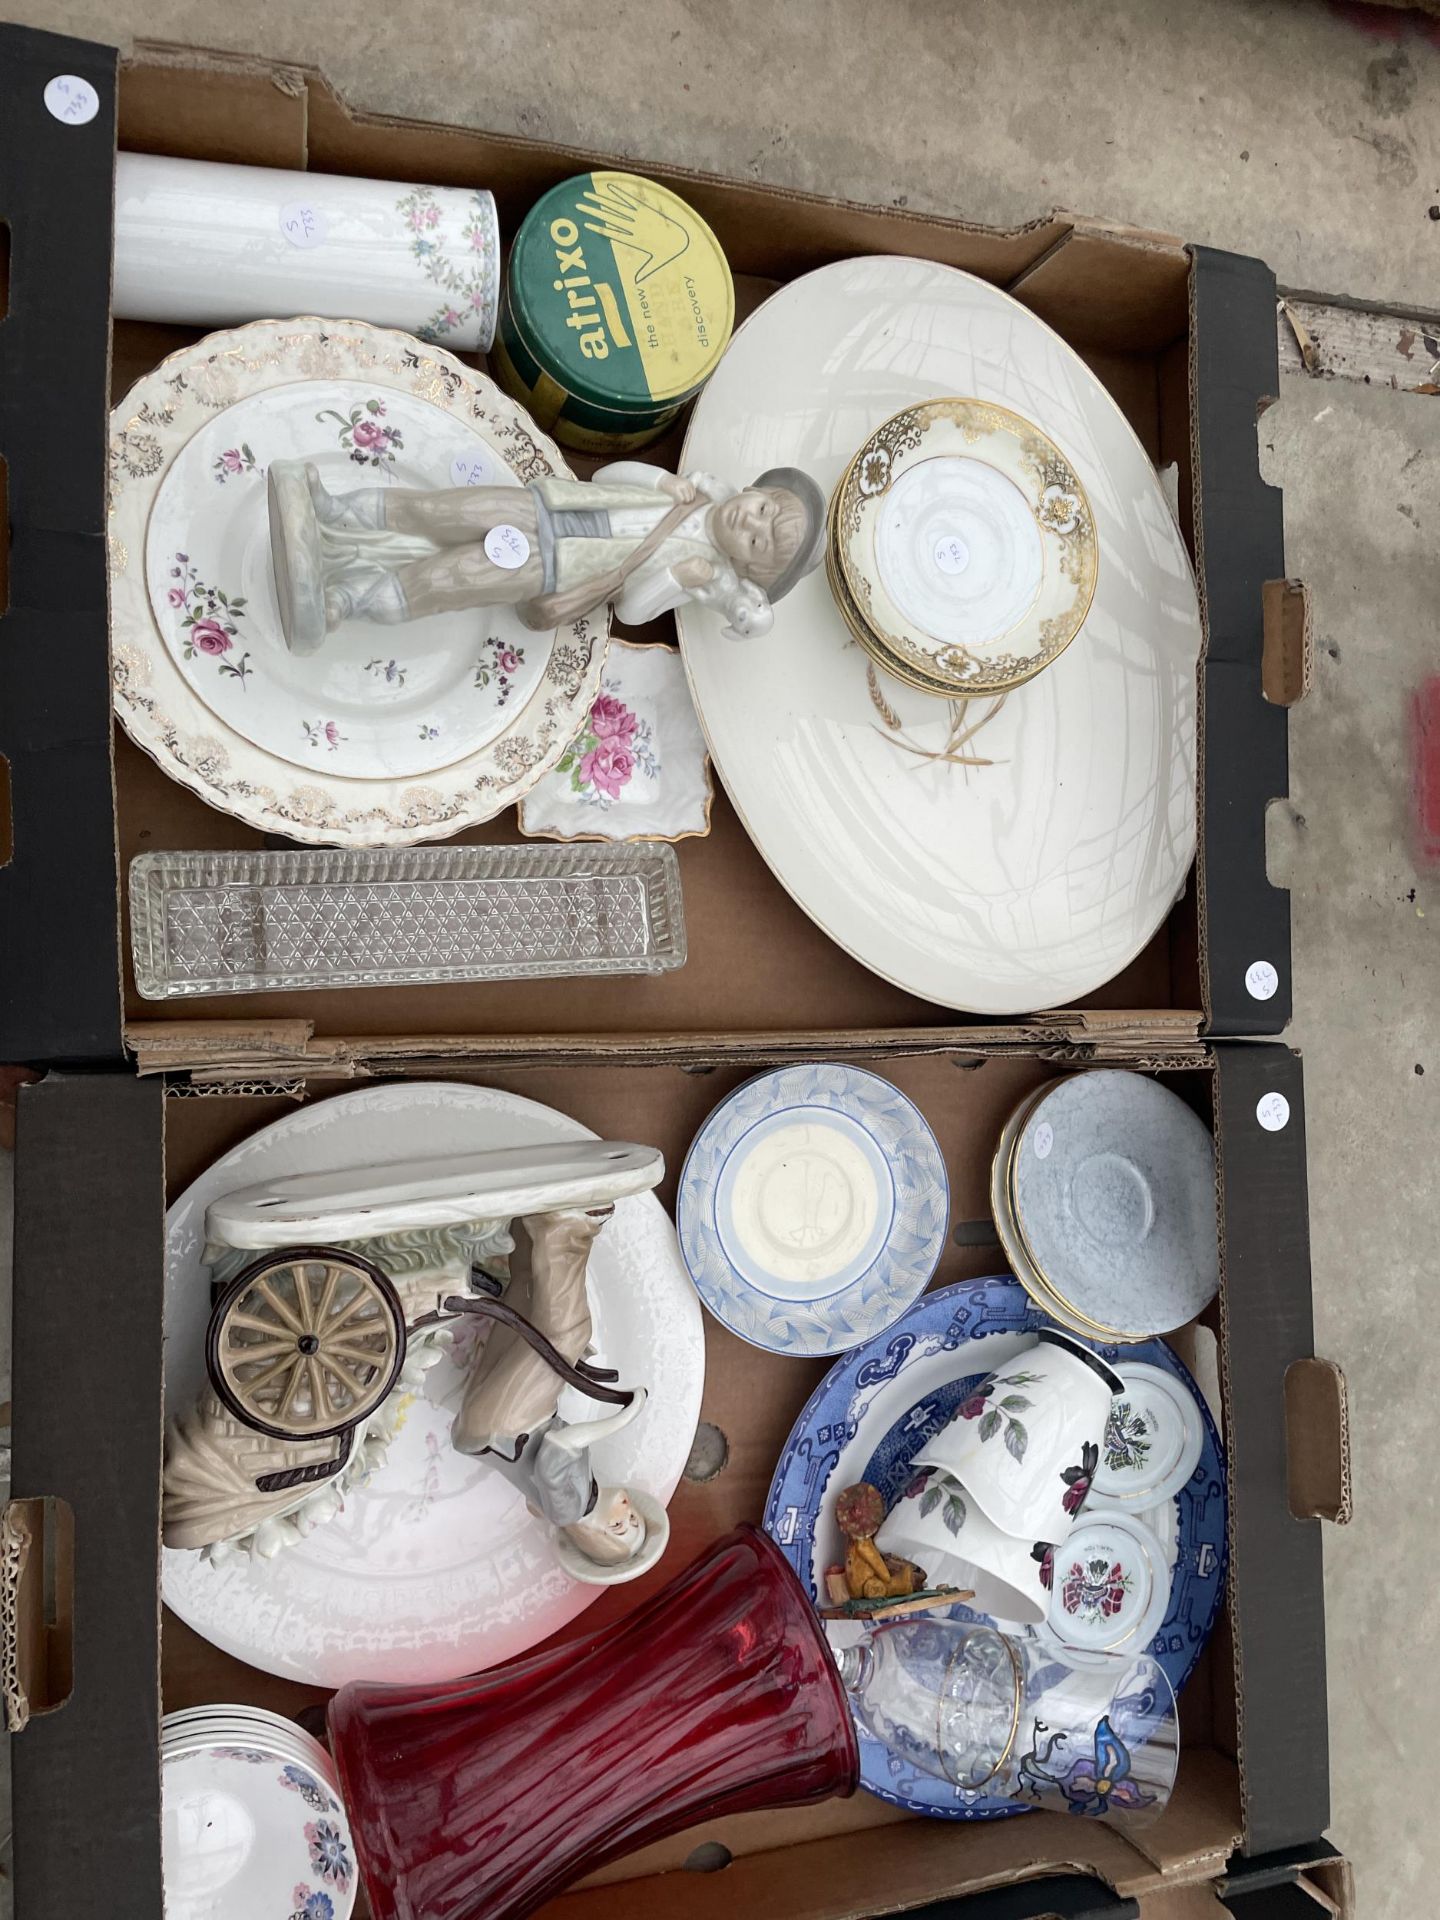 THREE BOXES OF VARIOUS CERAMIC ITEMS TO INCLUDE PLATES, CUPS, ETC - Image 2 of 3